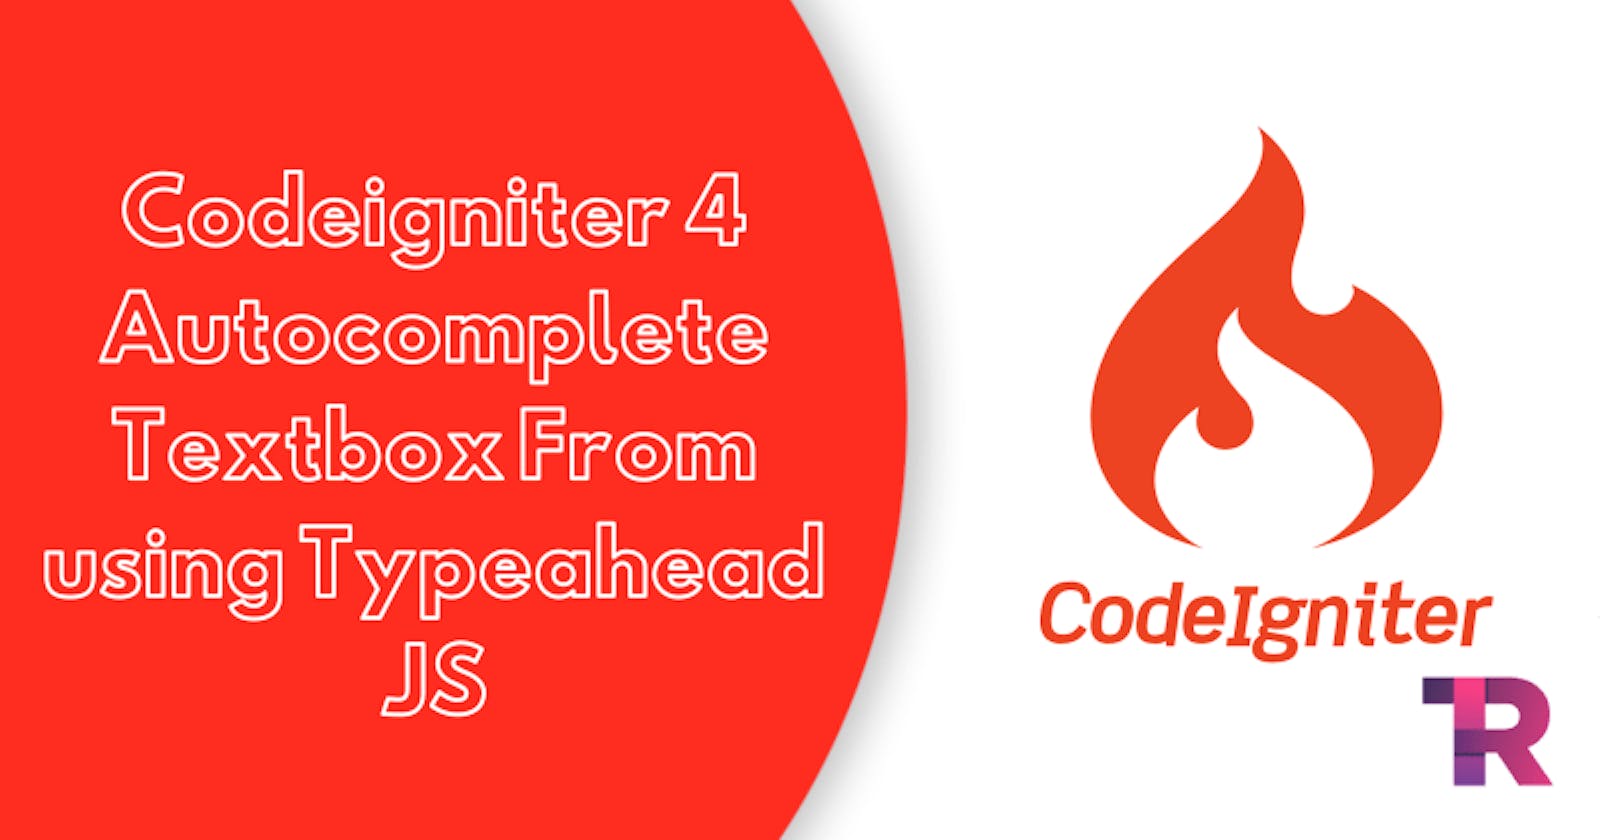 Codeigniter 4 Autocomplete Textbox From Database using Typeahead JS